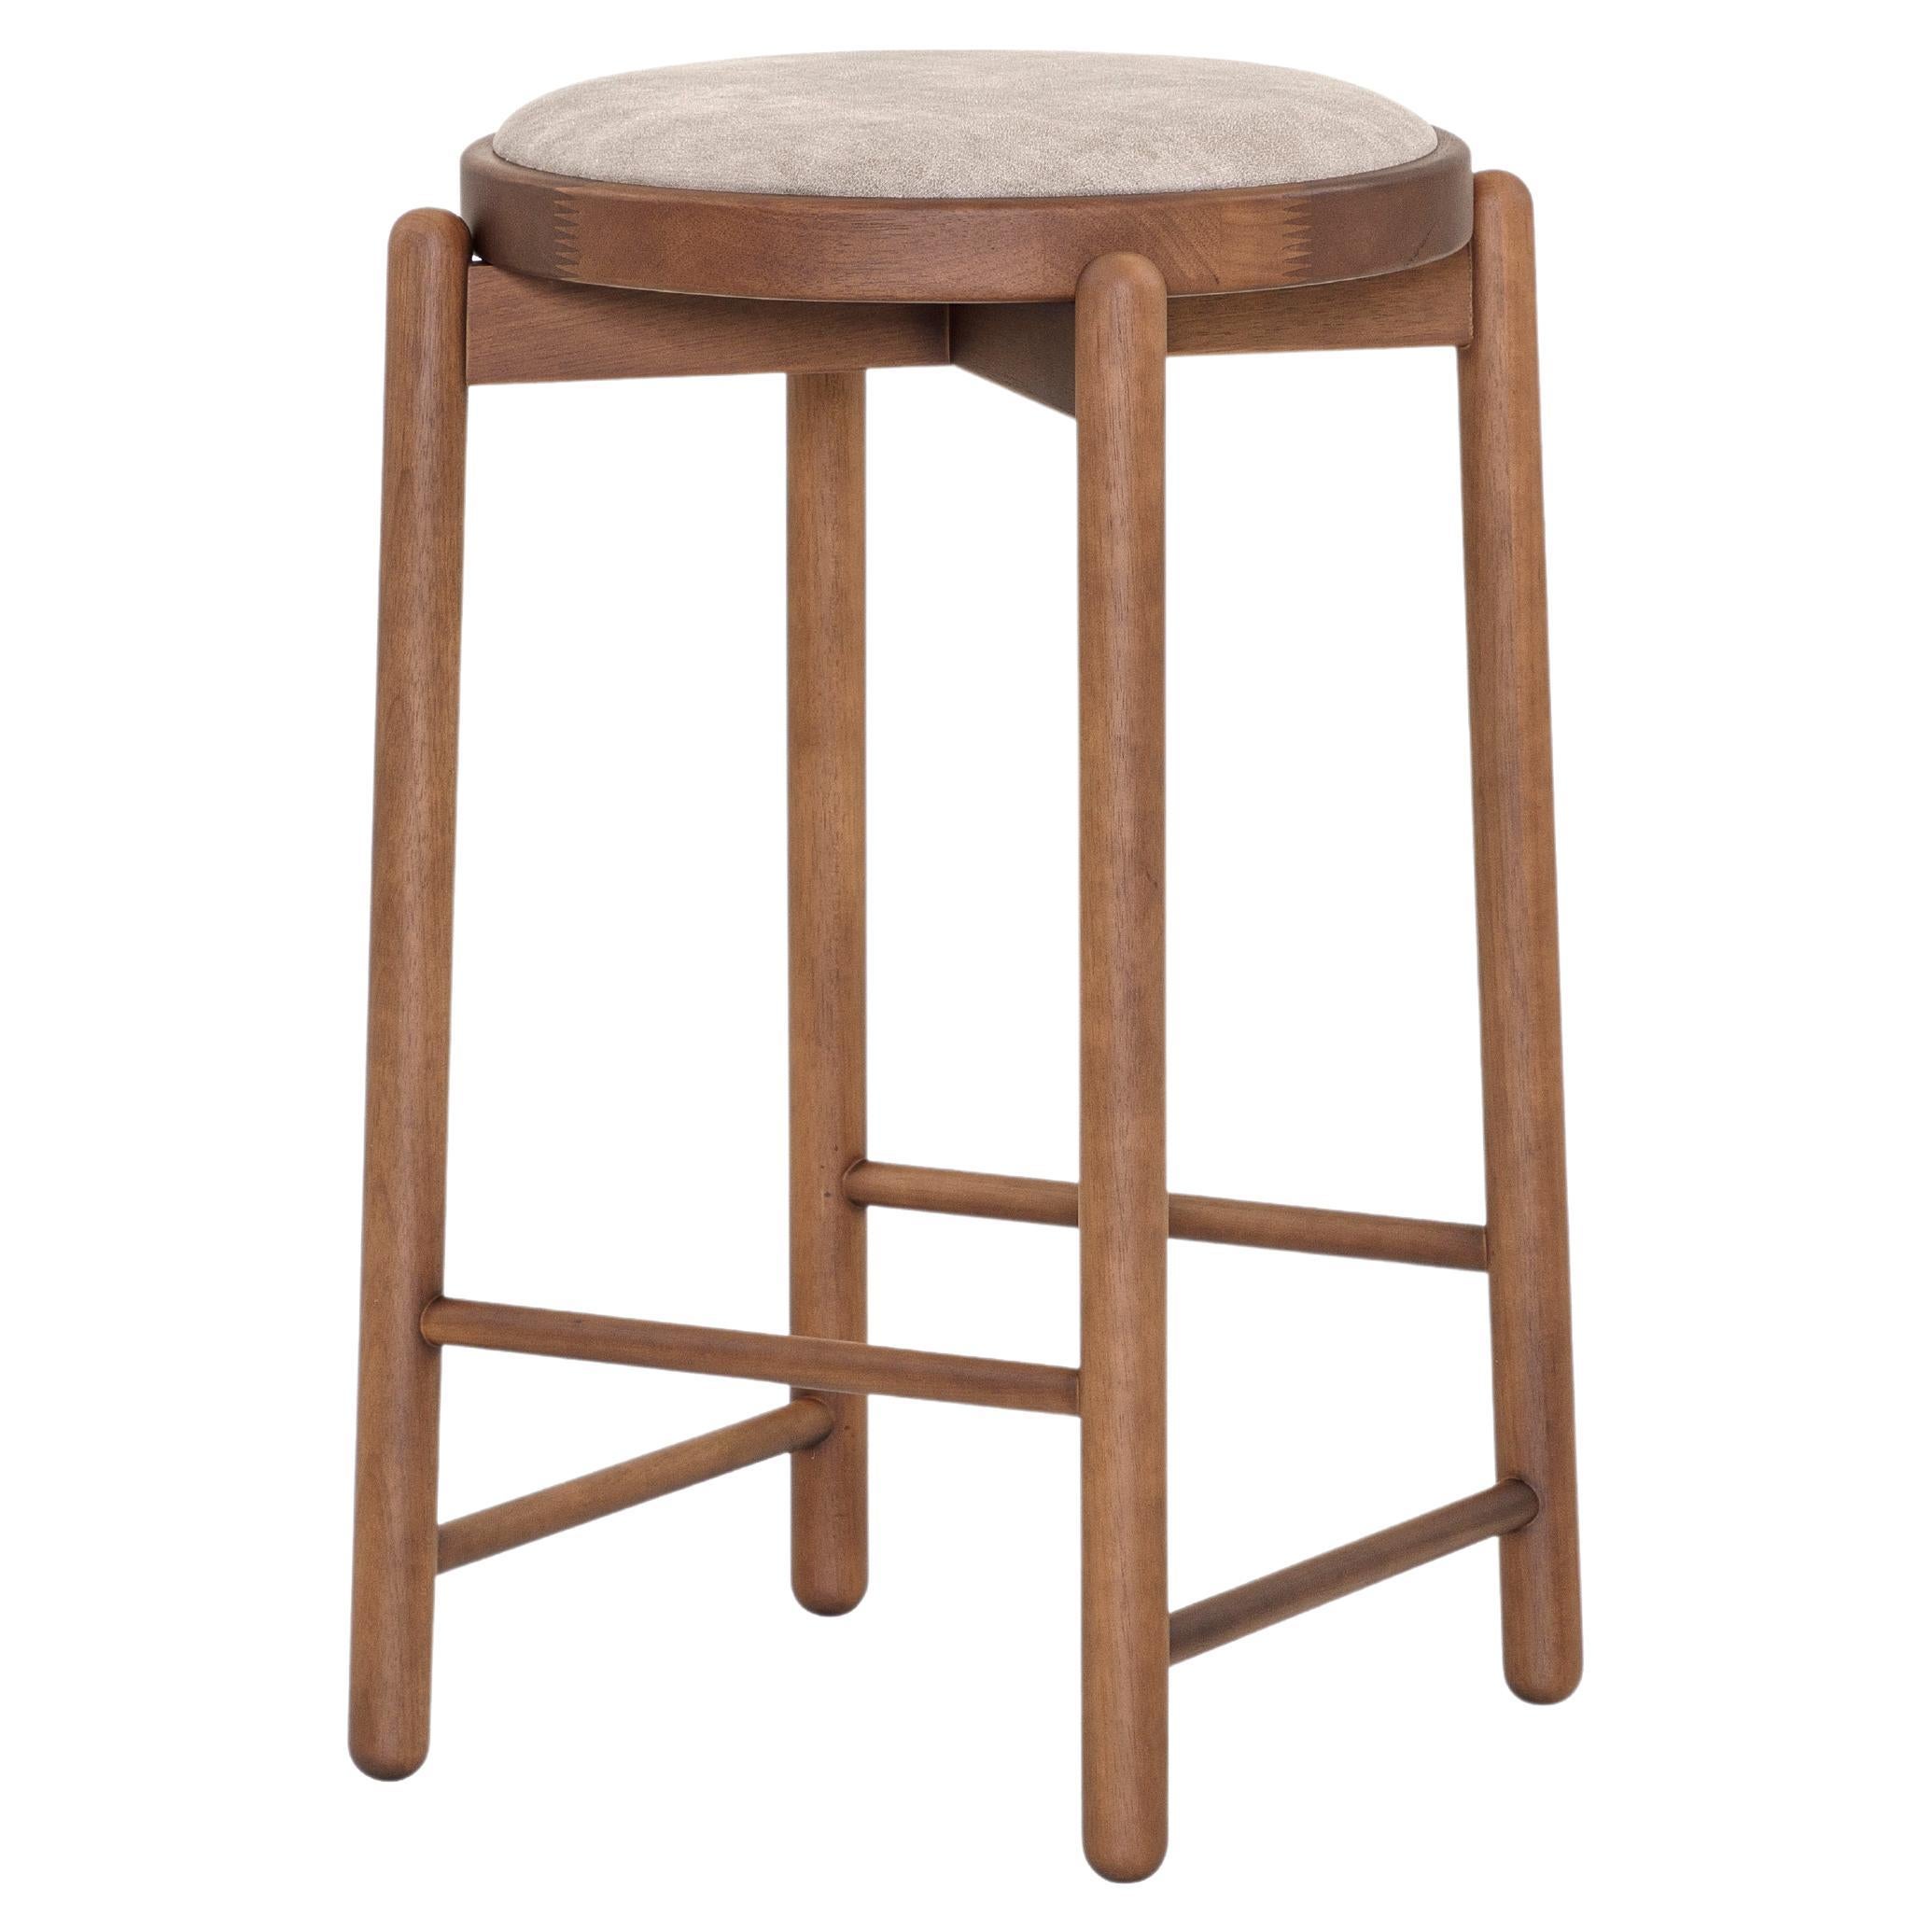 Maru Counter Stool in Walnut Wood Base and Upholstered Beige Seat